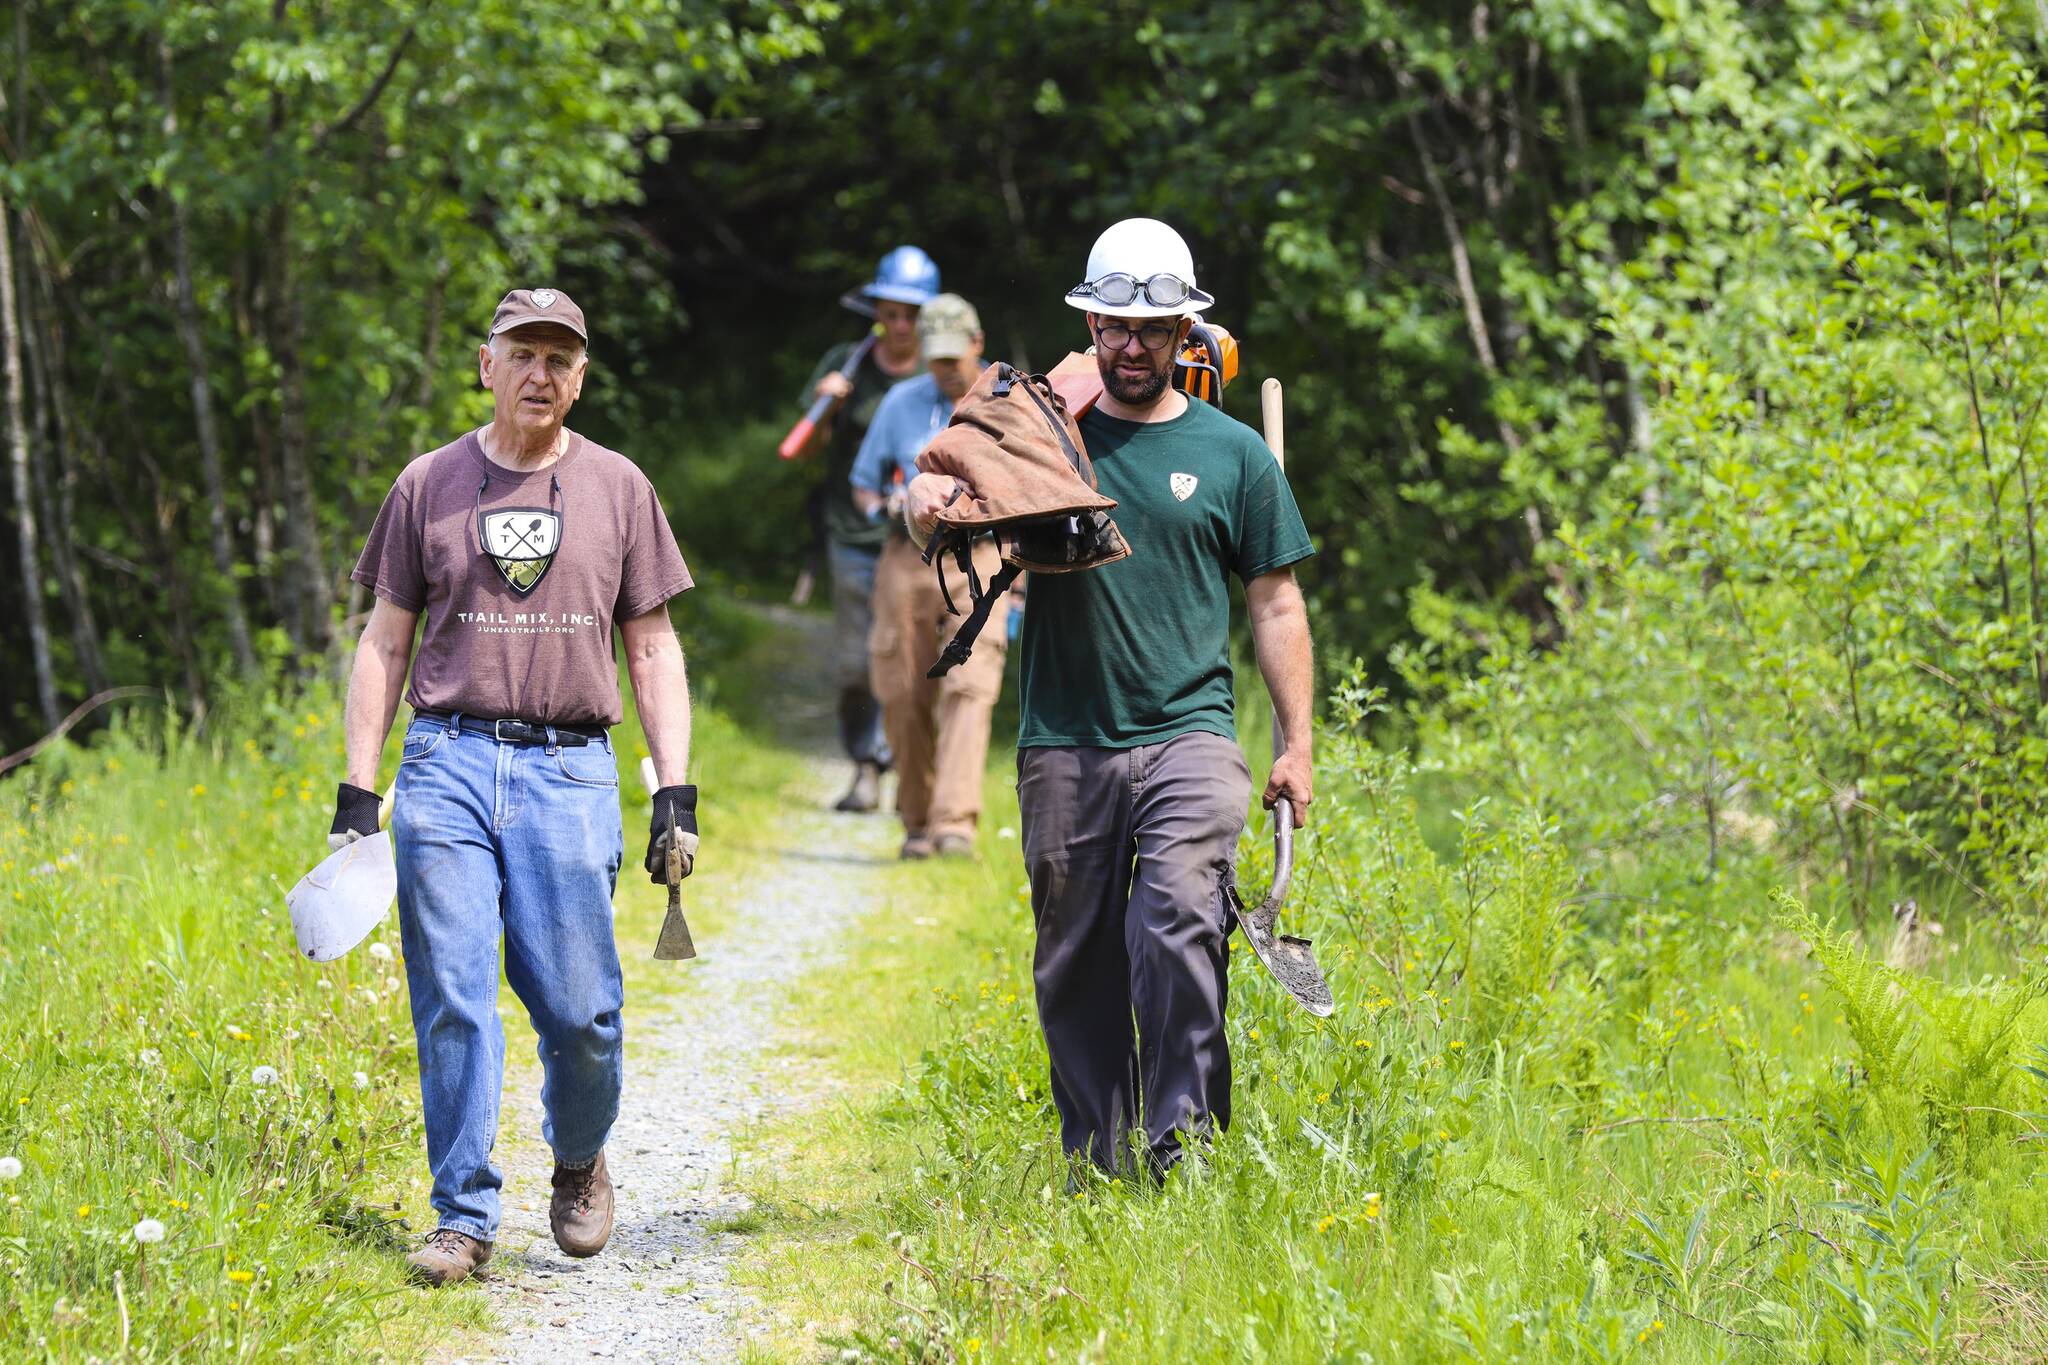 Trail Mix Inc.’s executive director, Ryan O’Shaughnessy, right, walks with Mike McKrill off Lemon Creek Trail on June 4, 2022 after taking part in the organization’s annual National Trails Day event. (Michael S. Lockett / Juneau Empire)